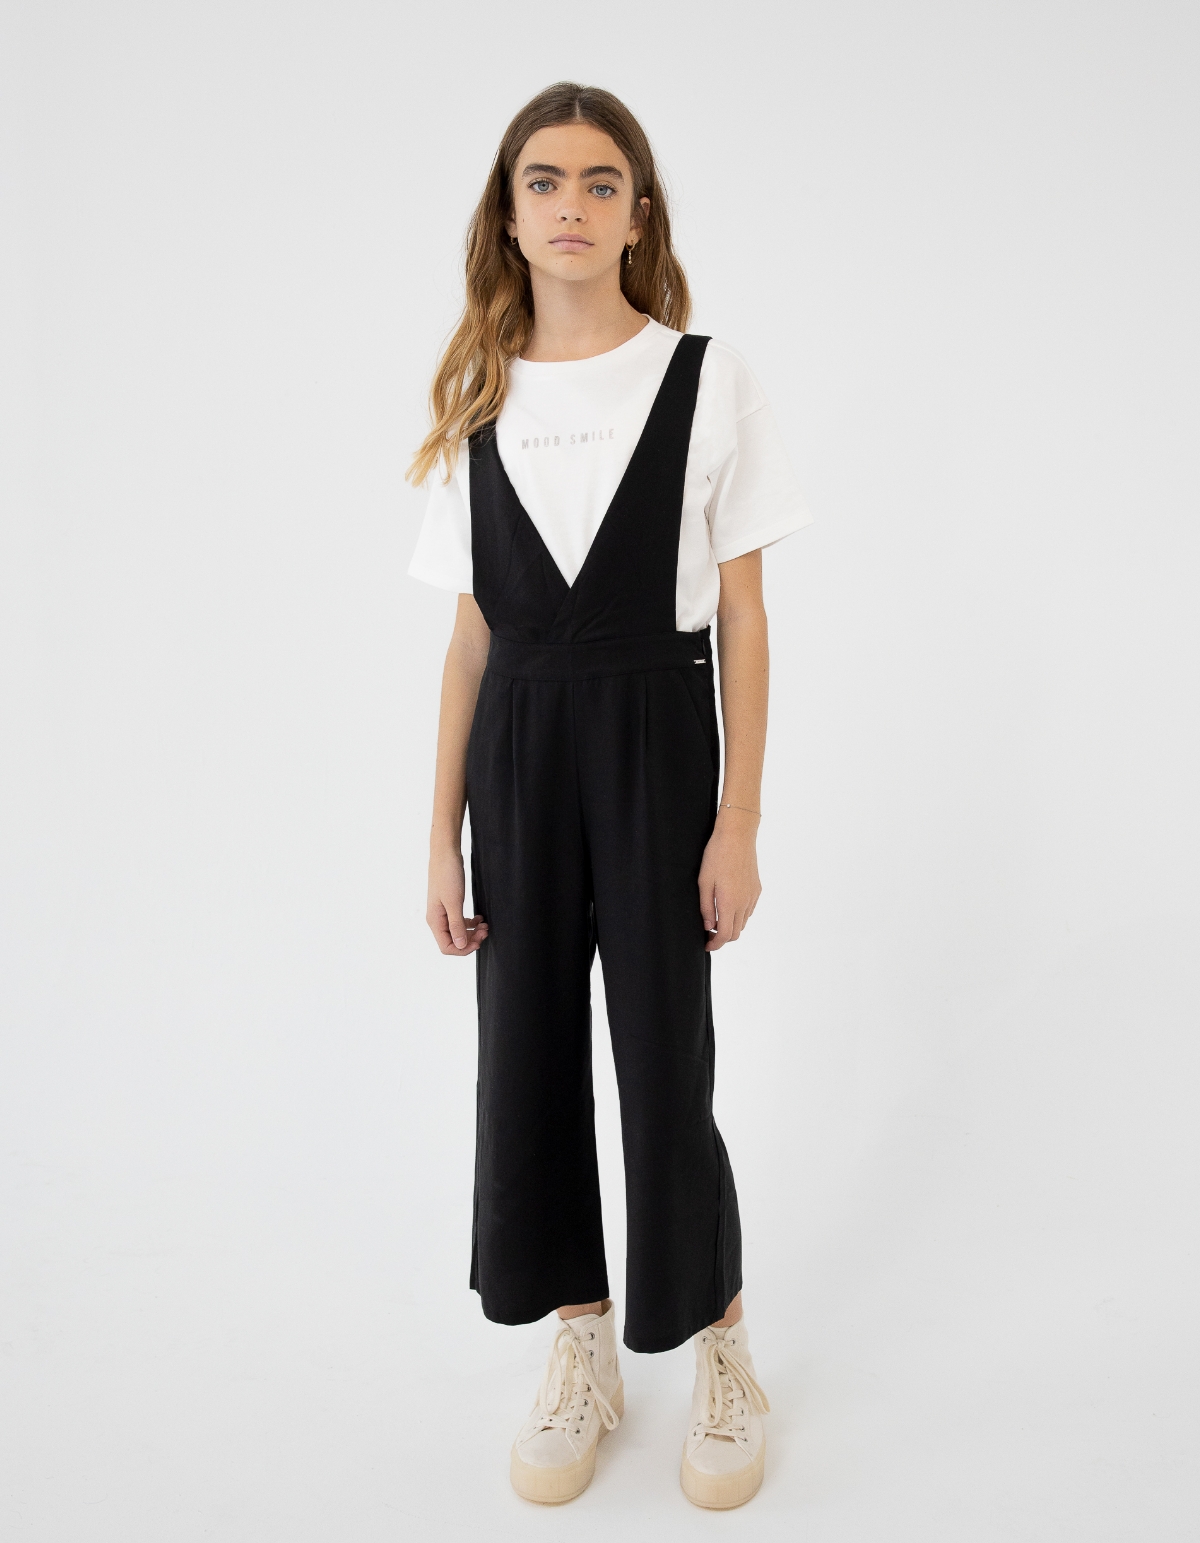 Girls’ black dungarees & white T-shirt outfit